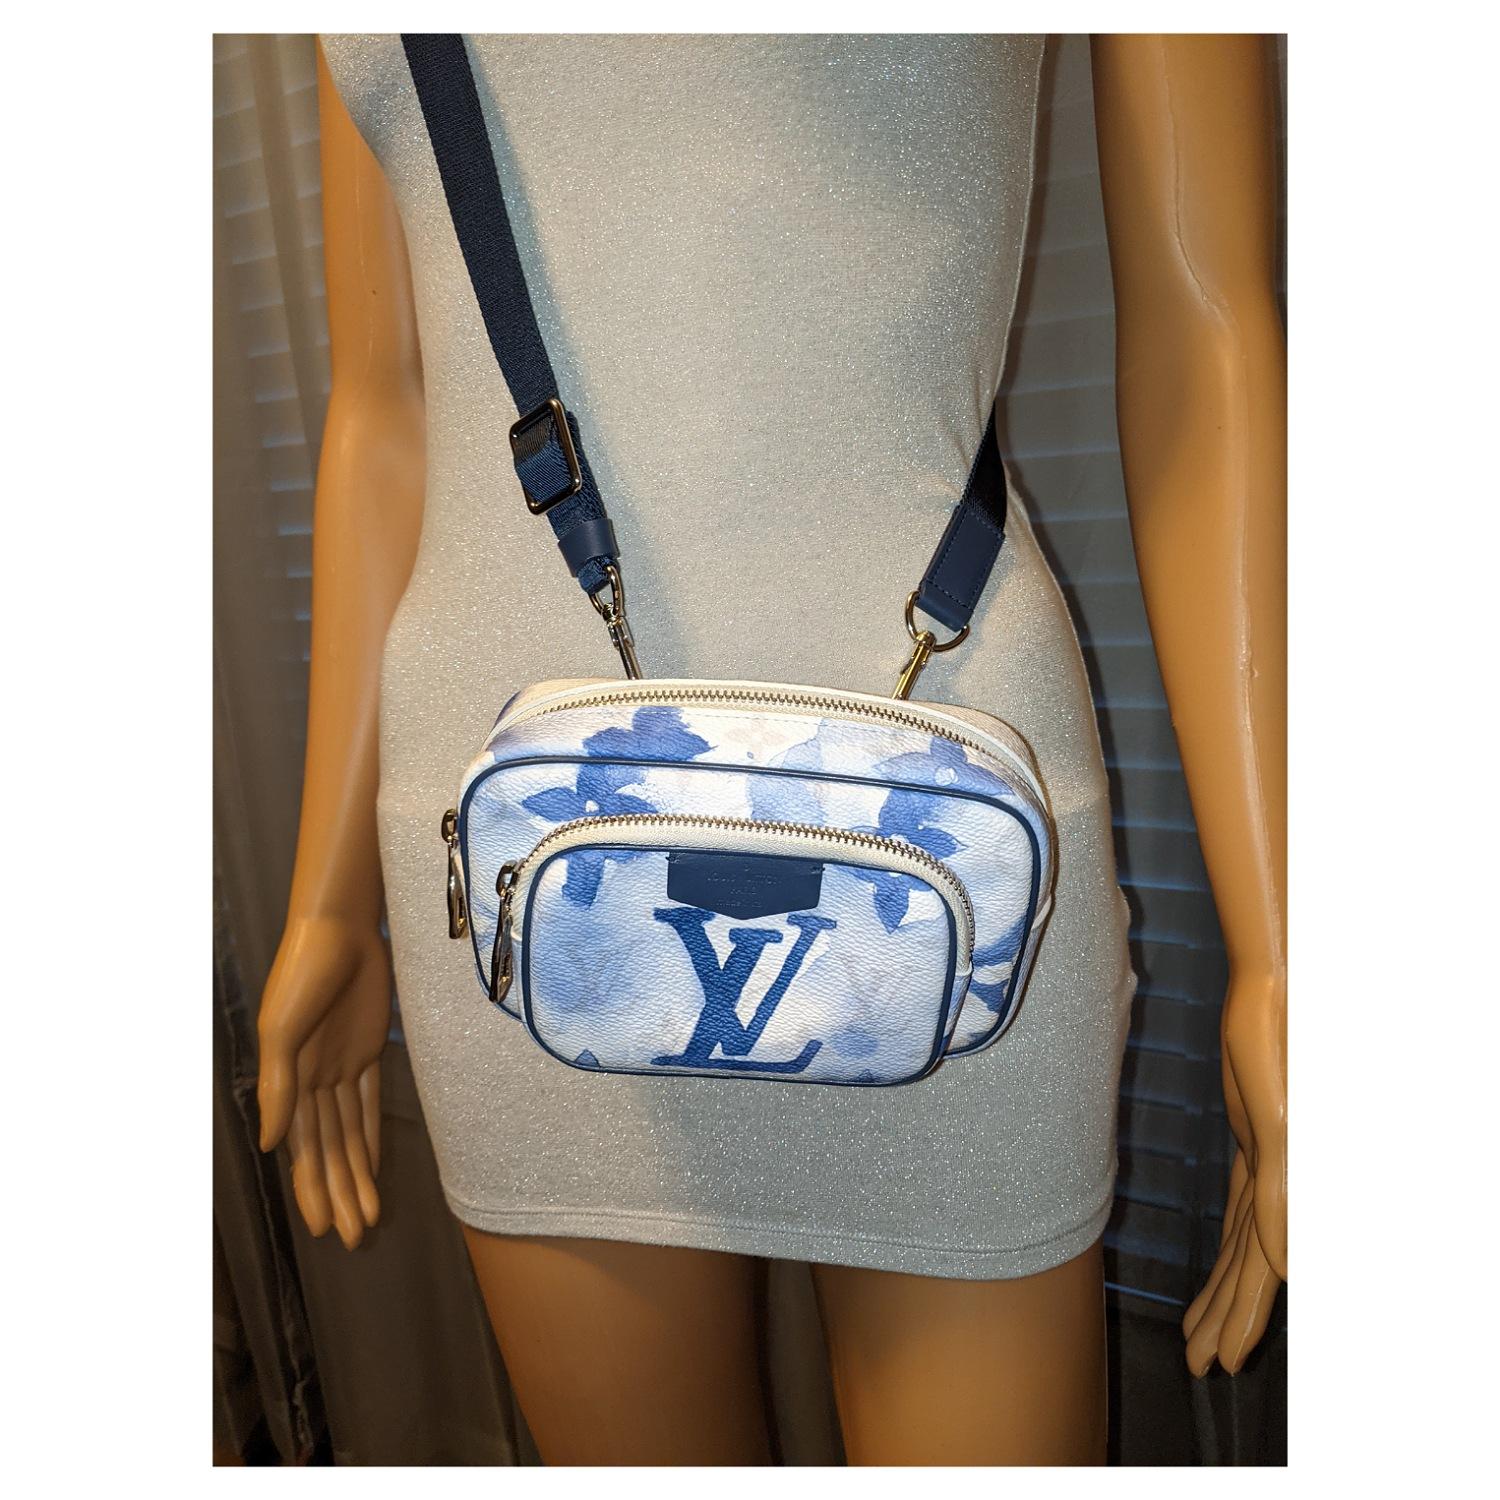 This stylish bag is crafted of Monogram canvas in white with a blue watercolor effect. The bag features a blue fabric adjustable shoulder strap and a front zipper pocket. The top zipper opens to a blue fabric interior with a patch pocket.